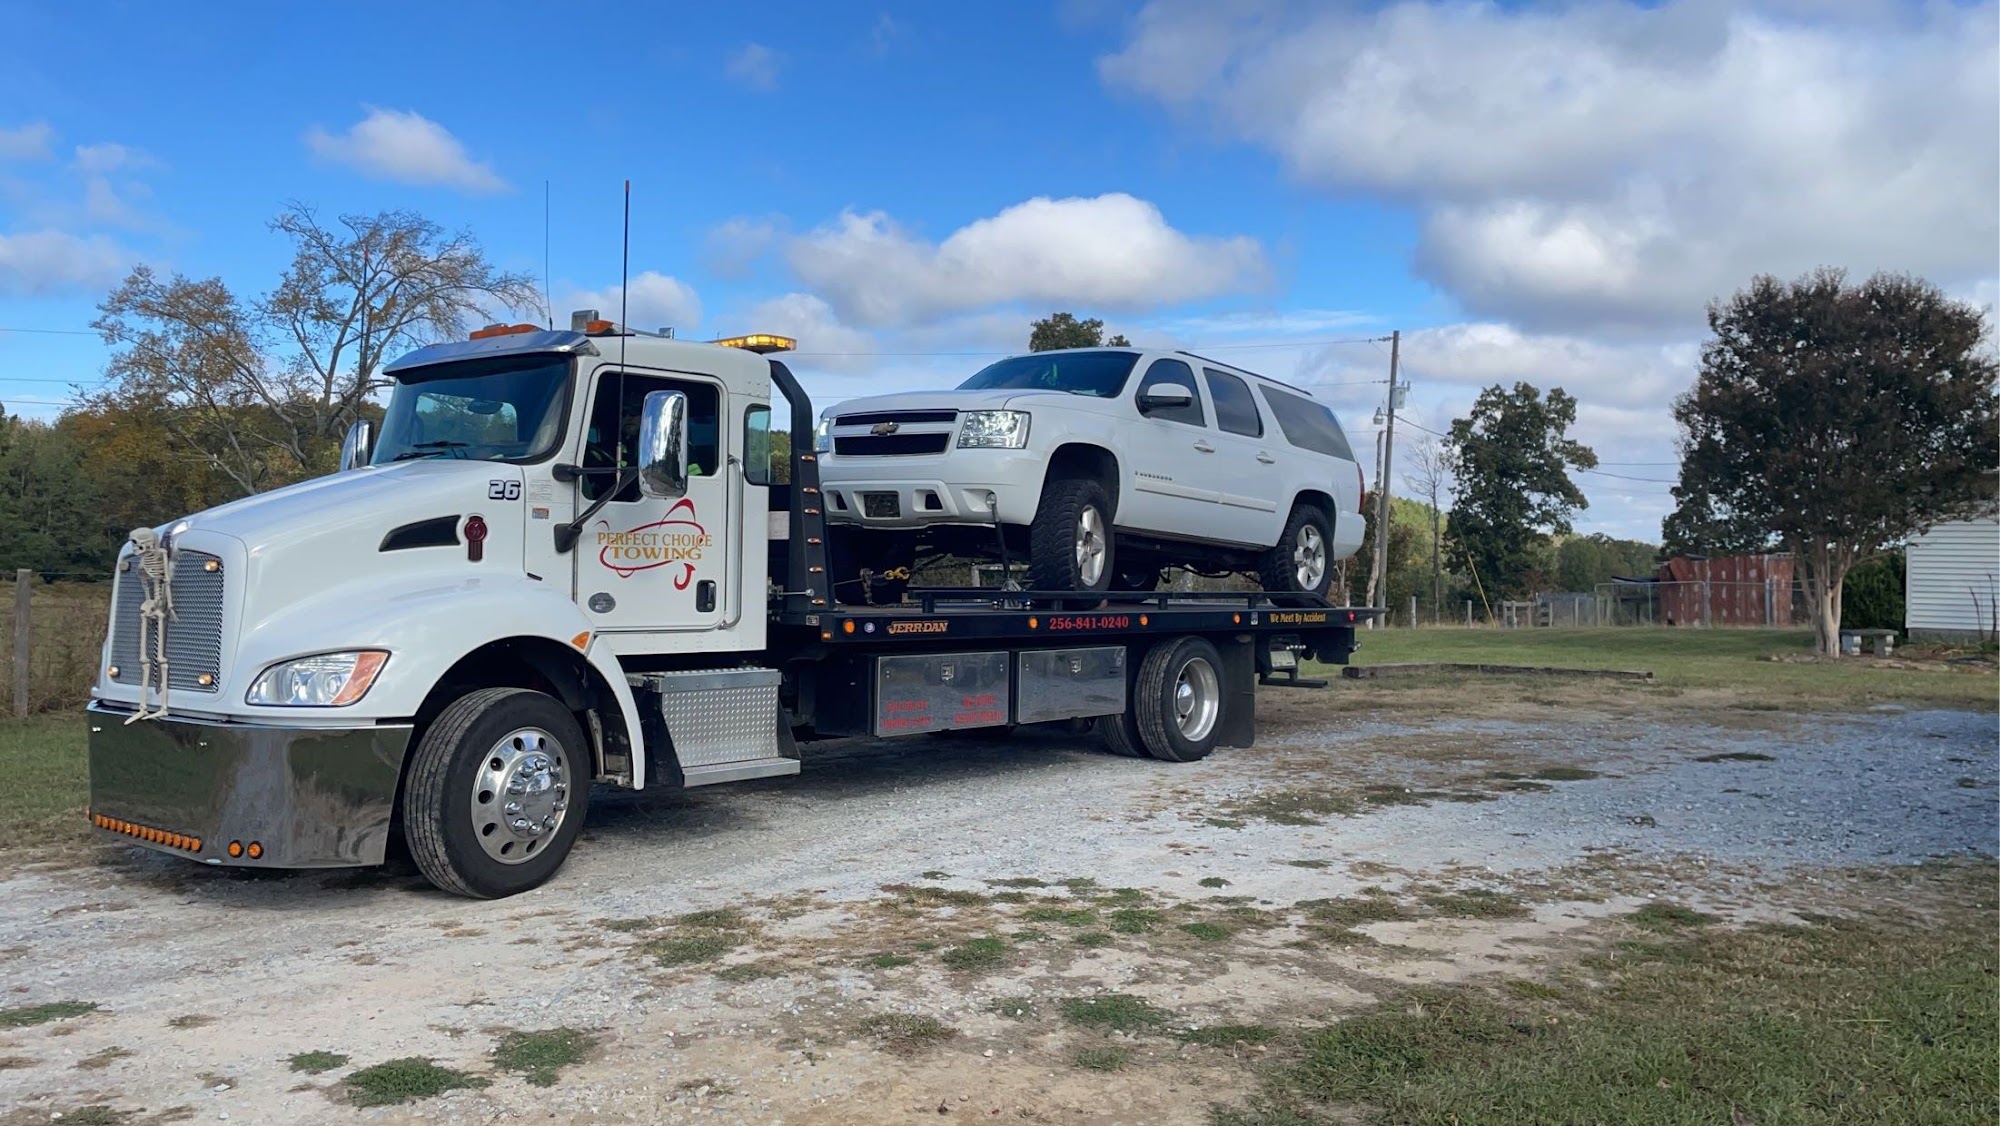 Perfect Choice Towing & Recovery, LLC 2618 Co Rd 1339, Vinemont Alabama 35179